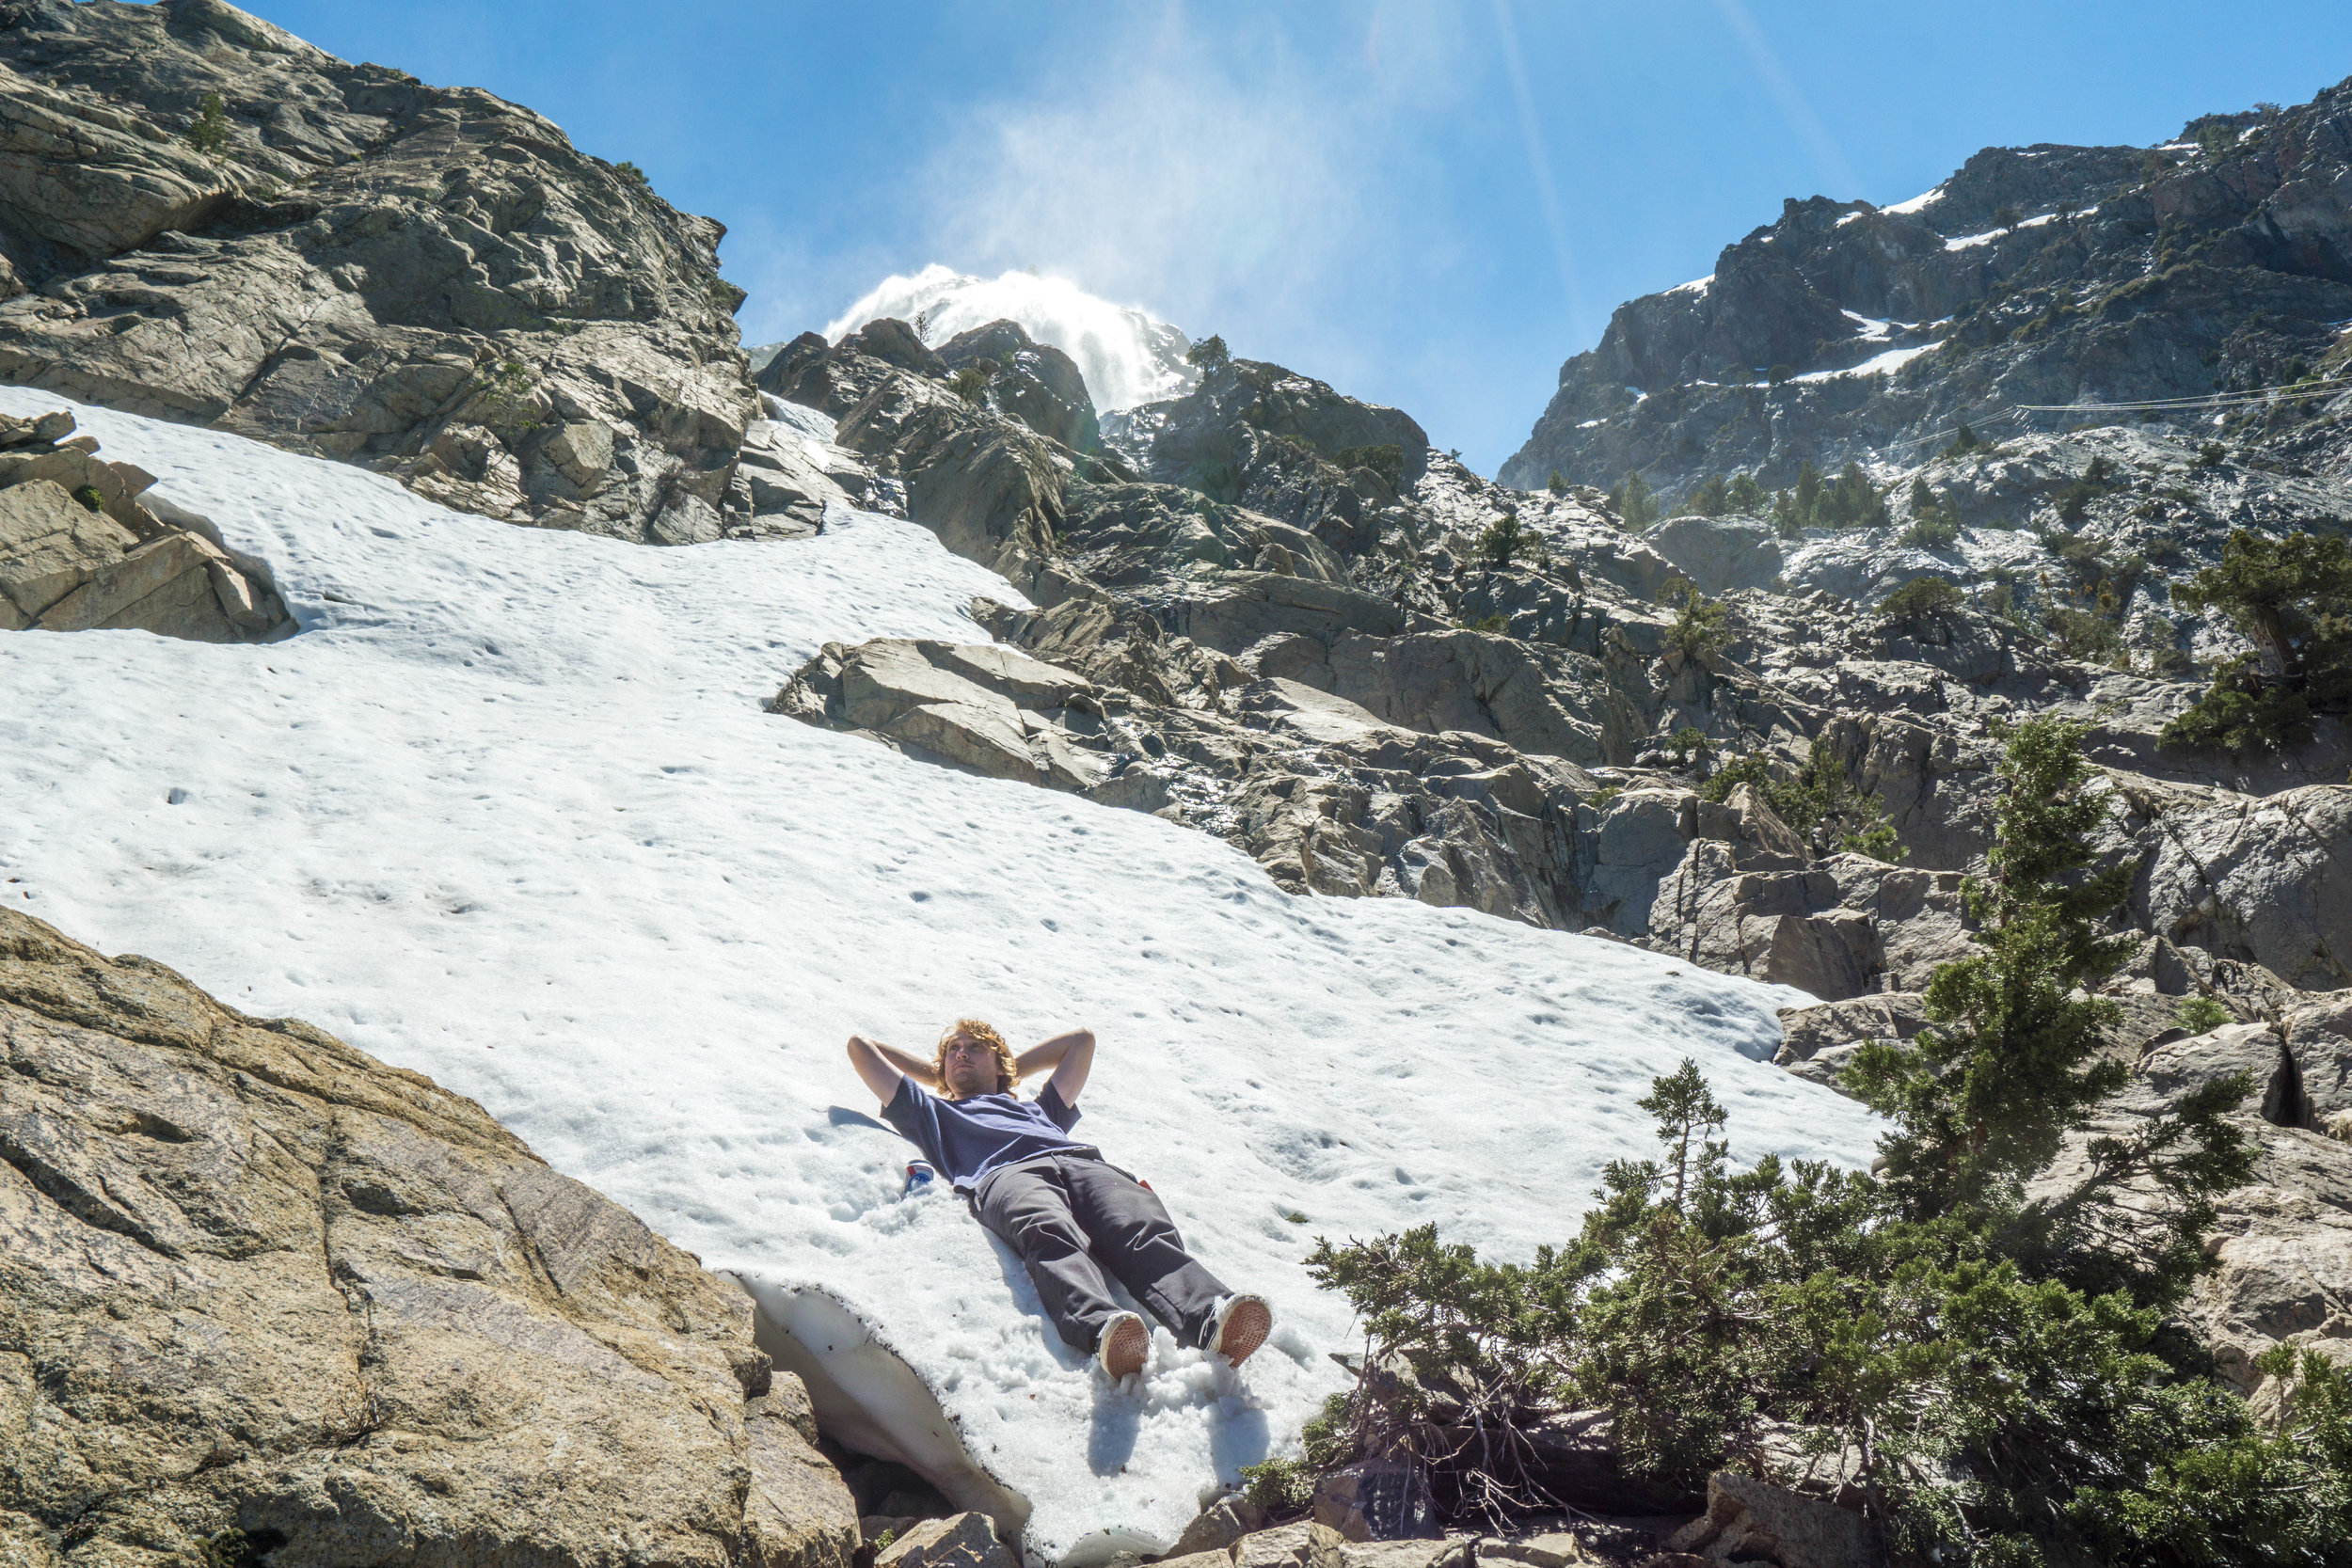 The noon-day sun had us cooking, so a mid-hike snow patch provided the ultimate cool down.